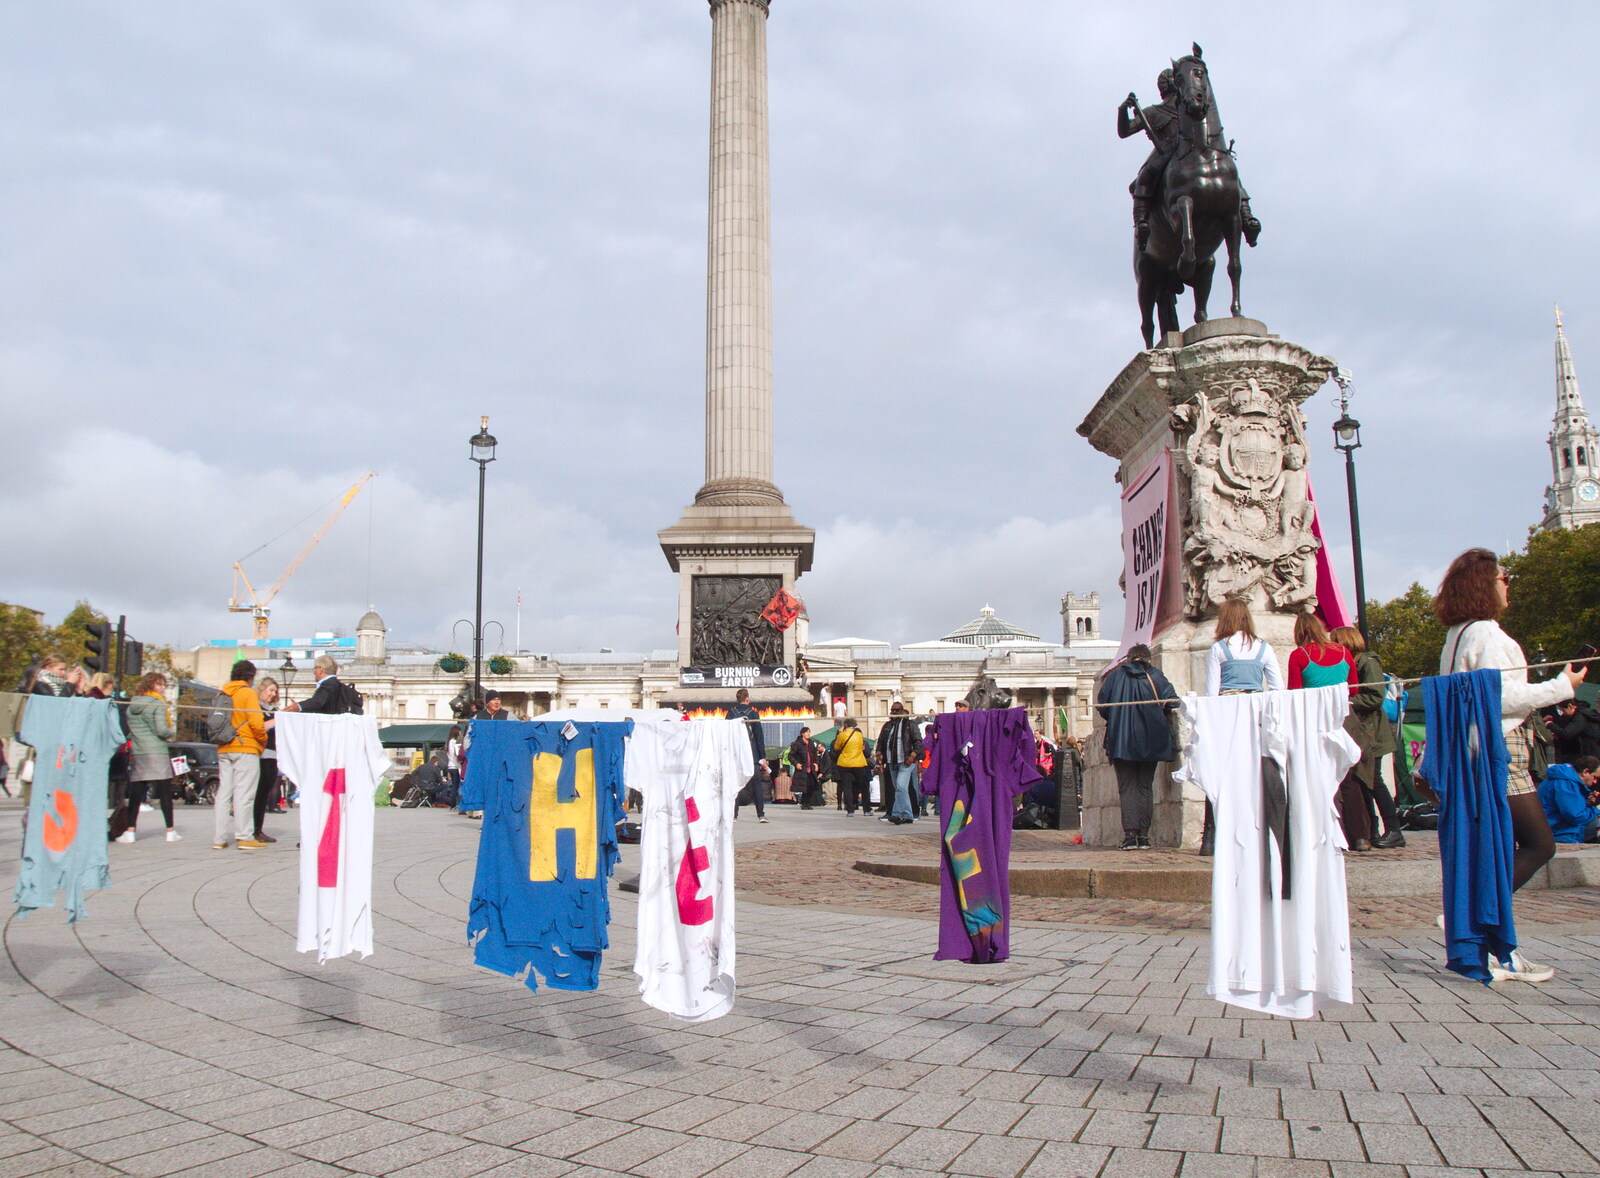 Someone's hung their washing out to dry from The Extinction Rebellion Protest, Westminster, London - 9th October 2019